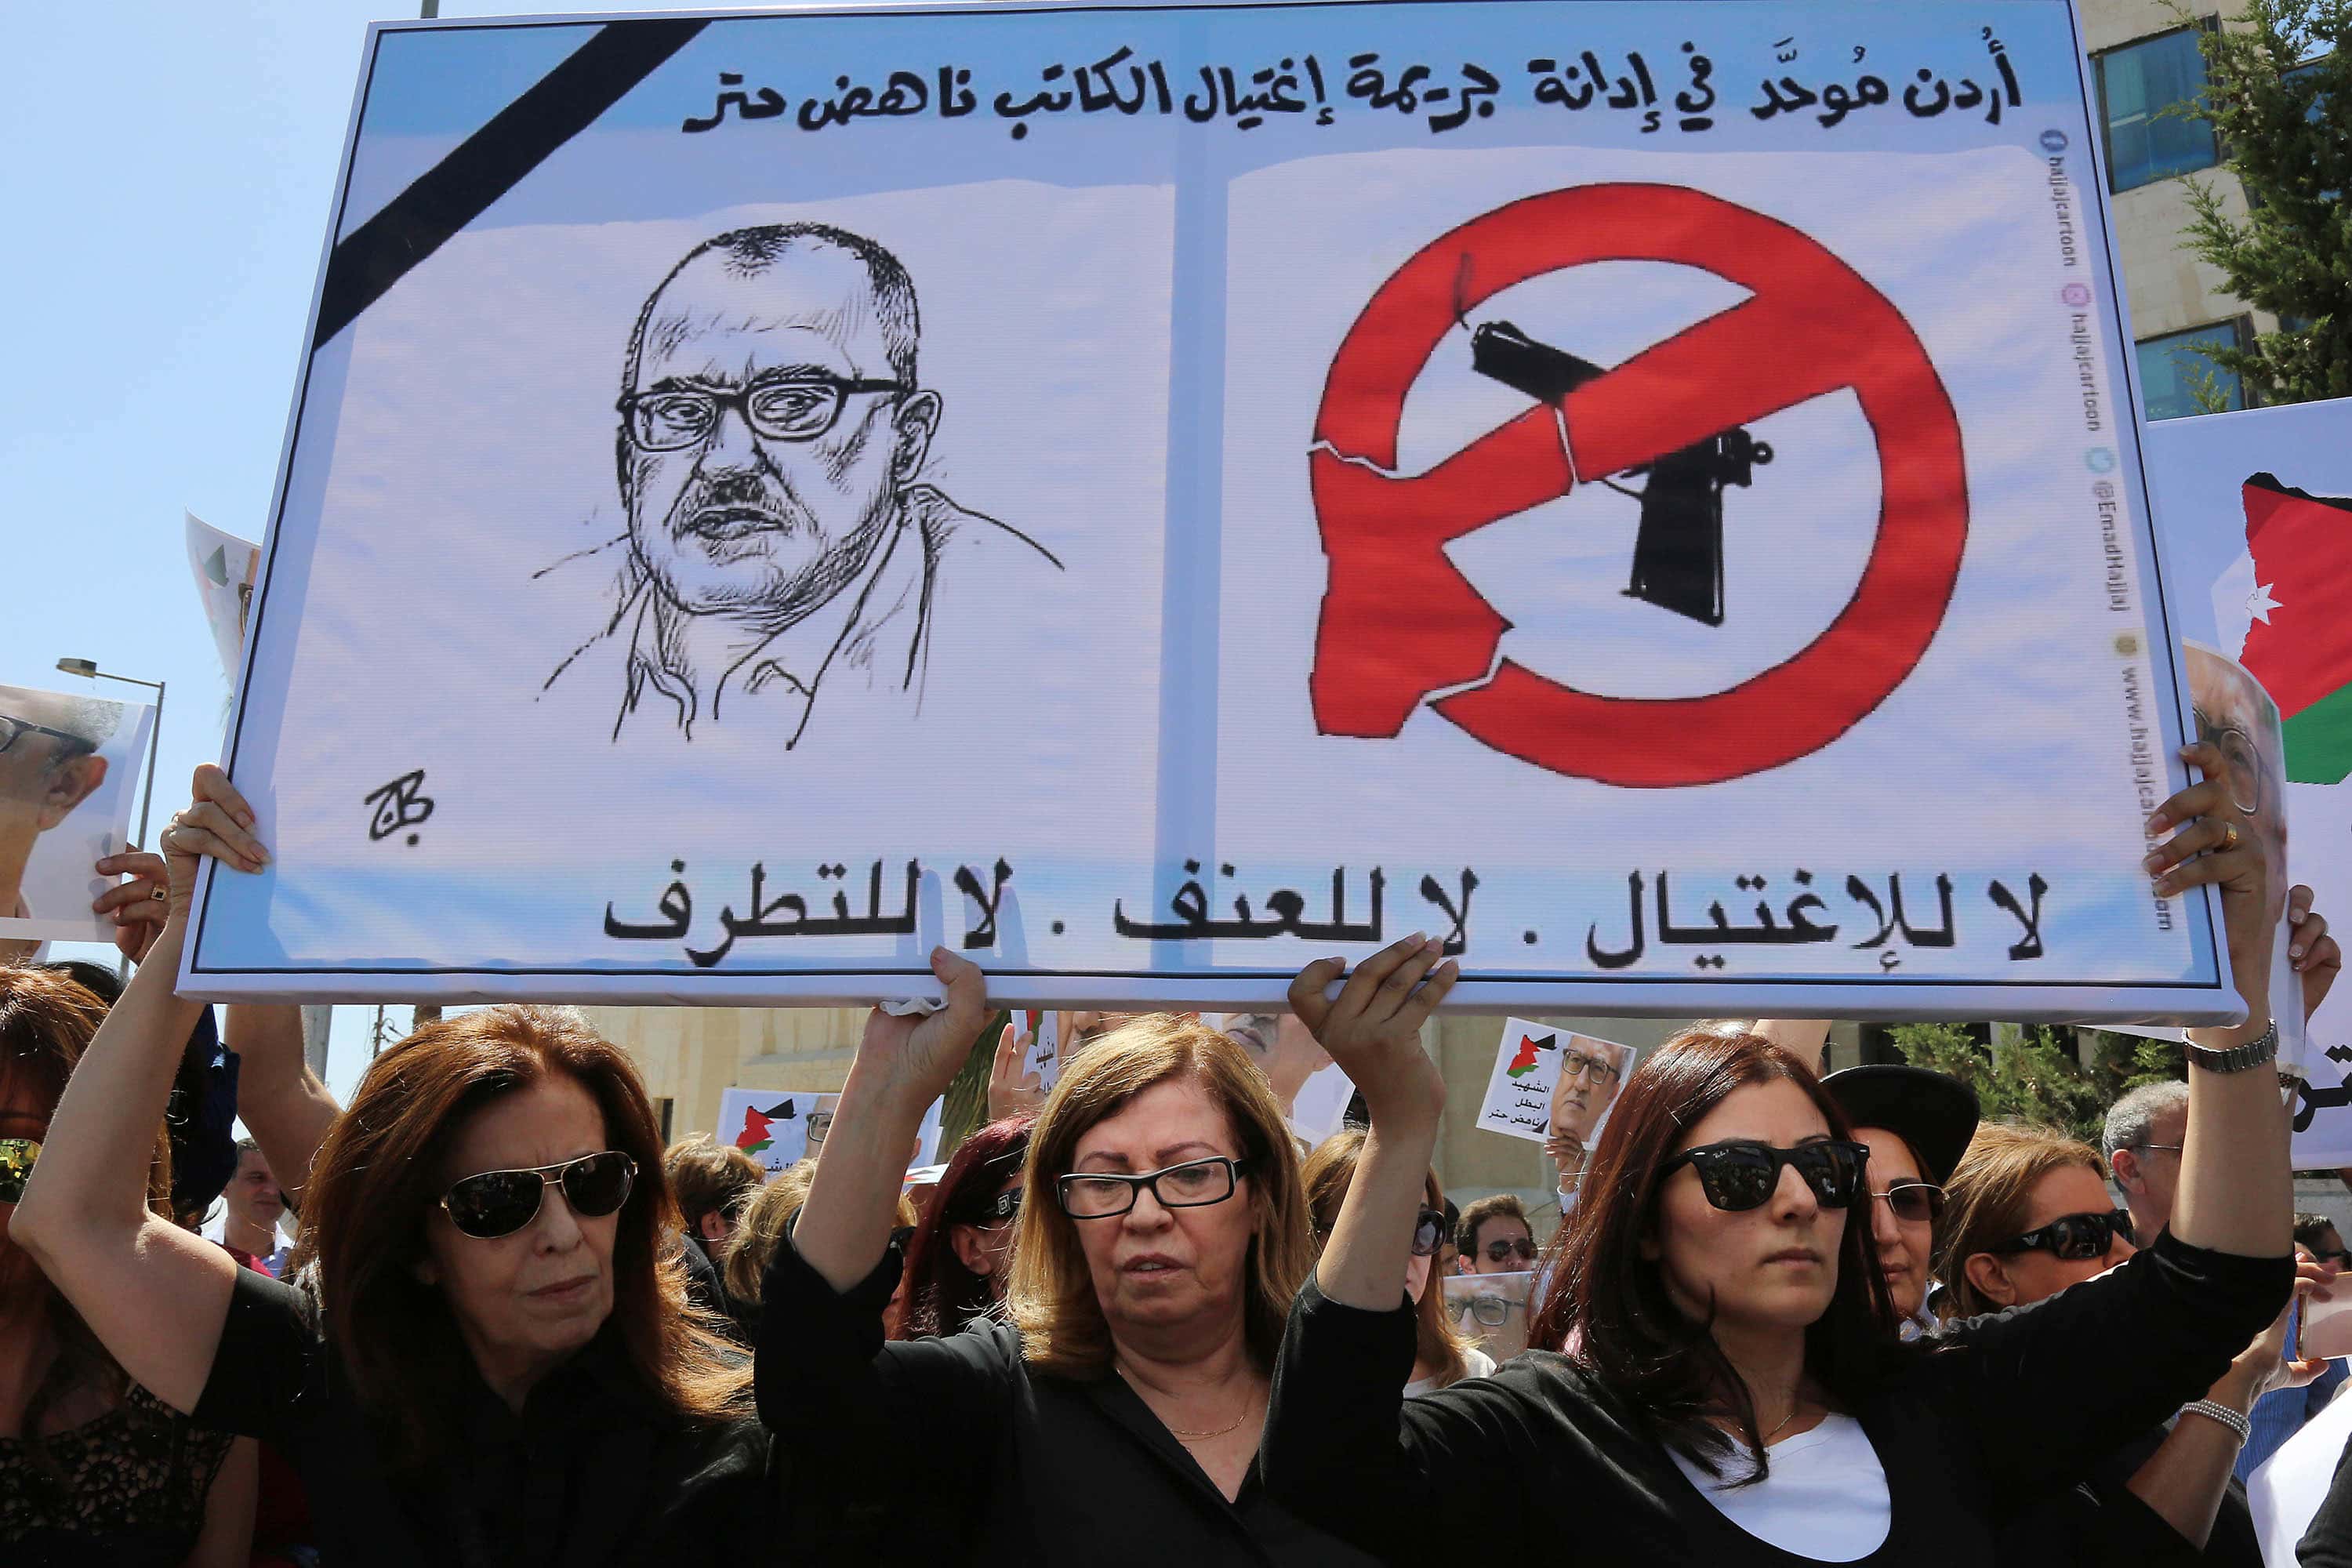 Relatives of Jordanian writer Nahed Hattar protest in front of the Jordanian Prime Ministry in Amman, Jordan over Hattar's death. Sign reads in Arabic: No to assassination, no to violence, no to extremism, AP Photo/Raad Adayleh